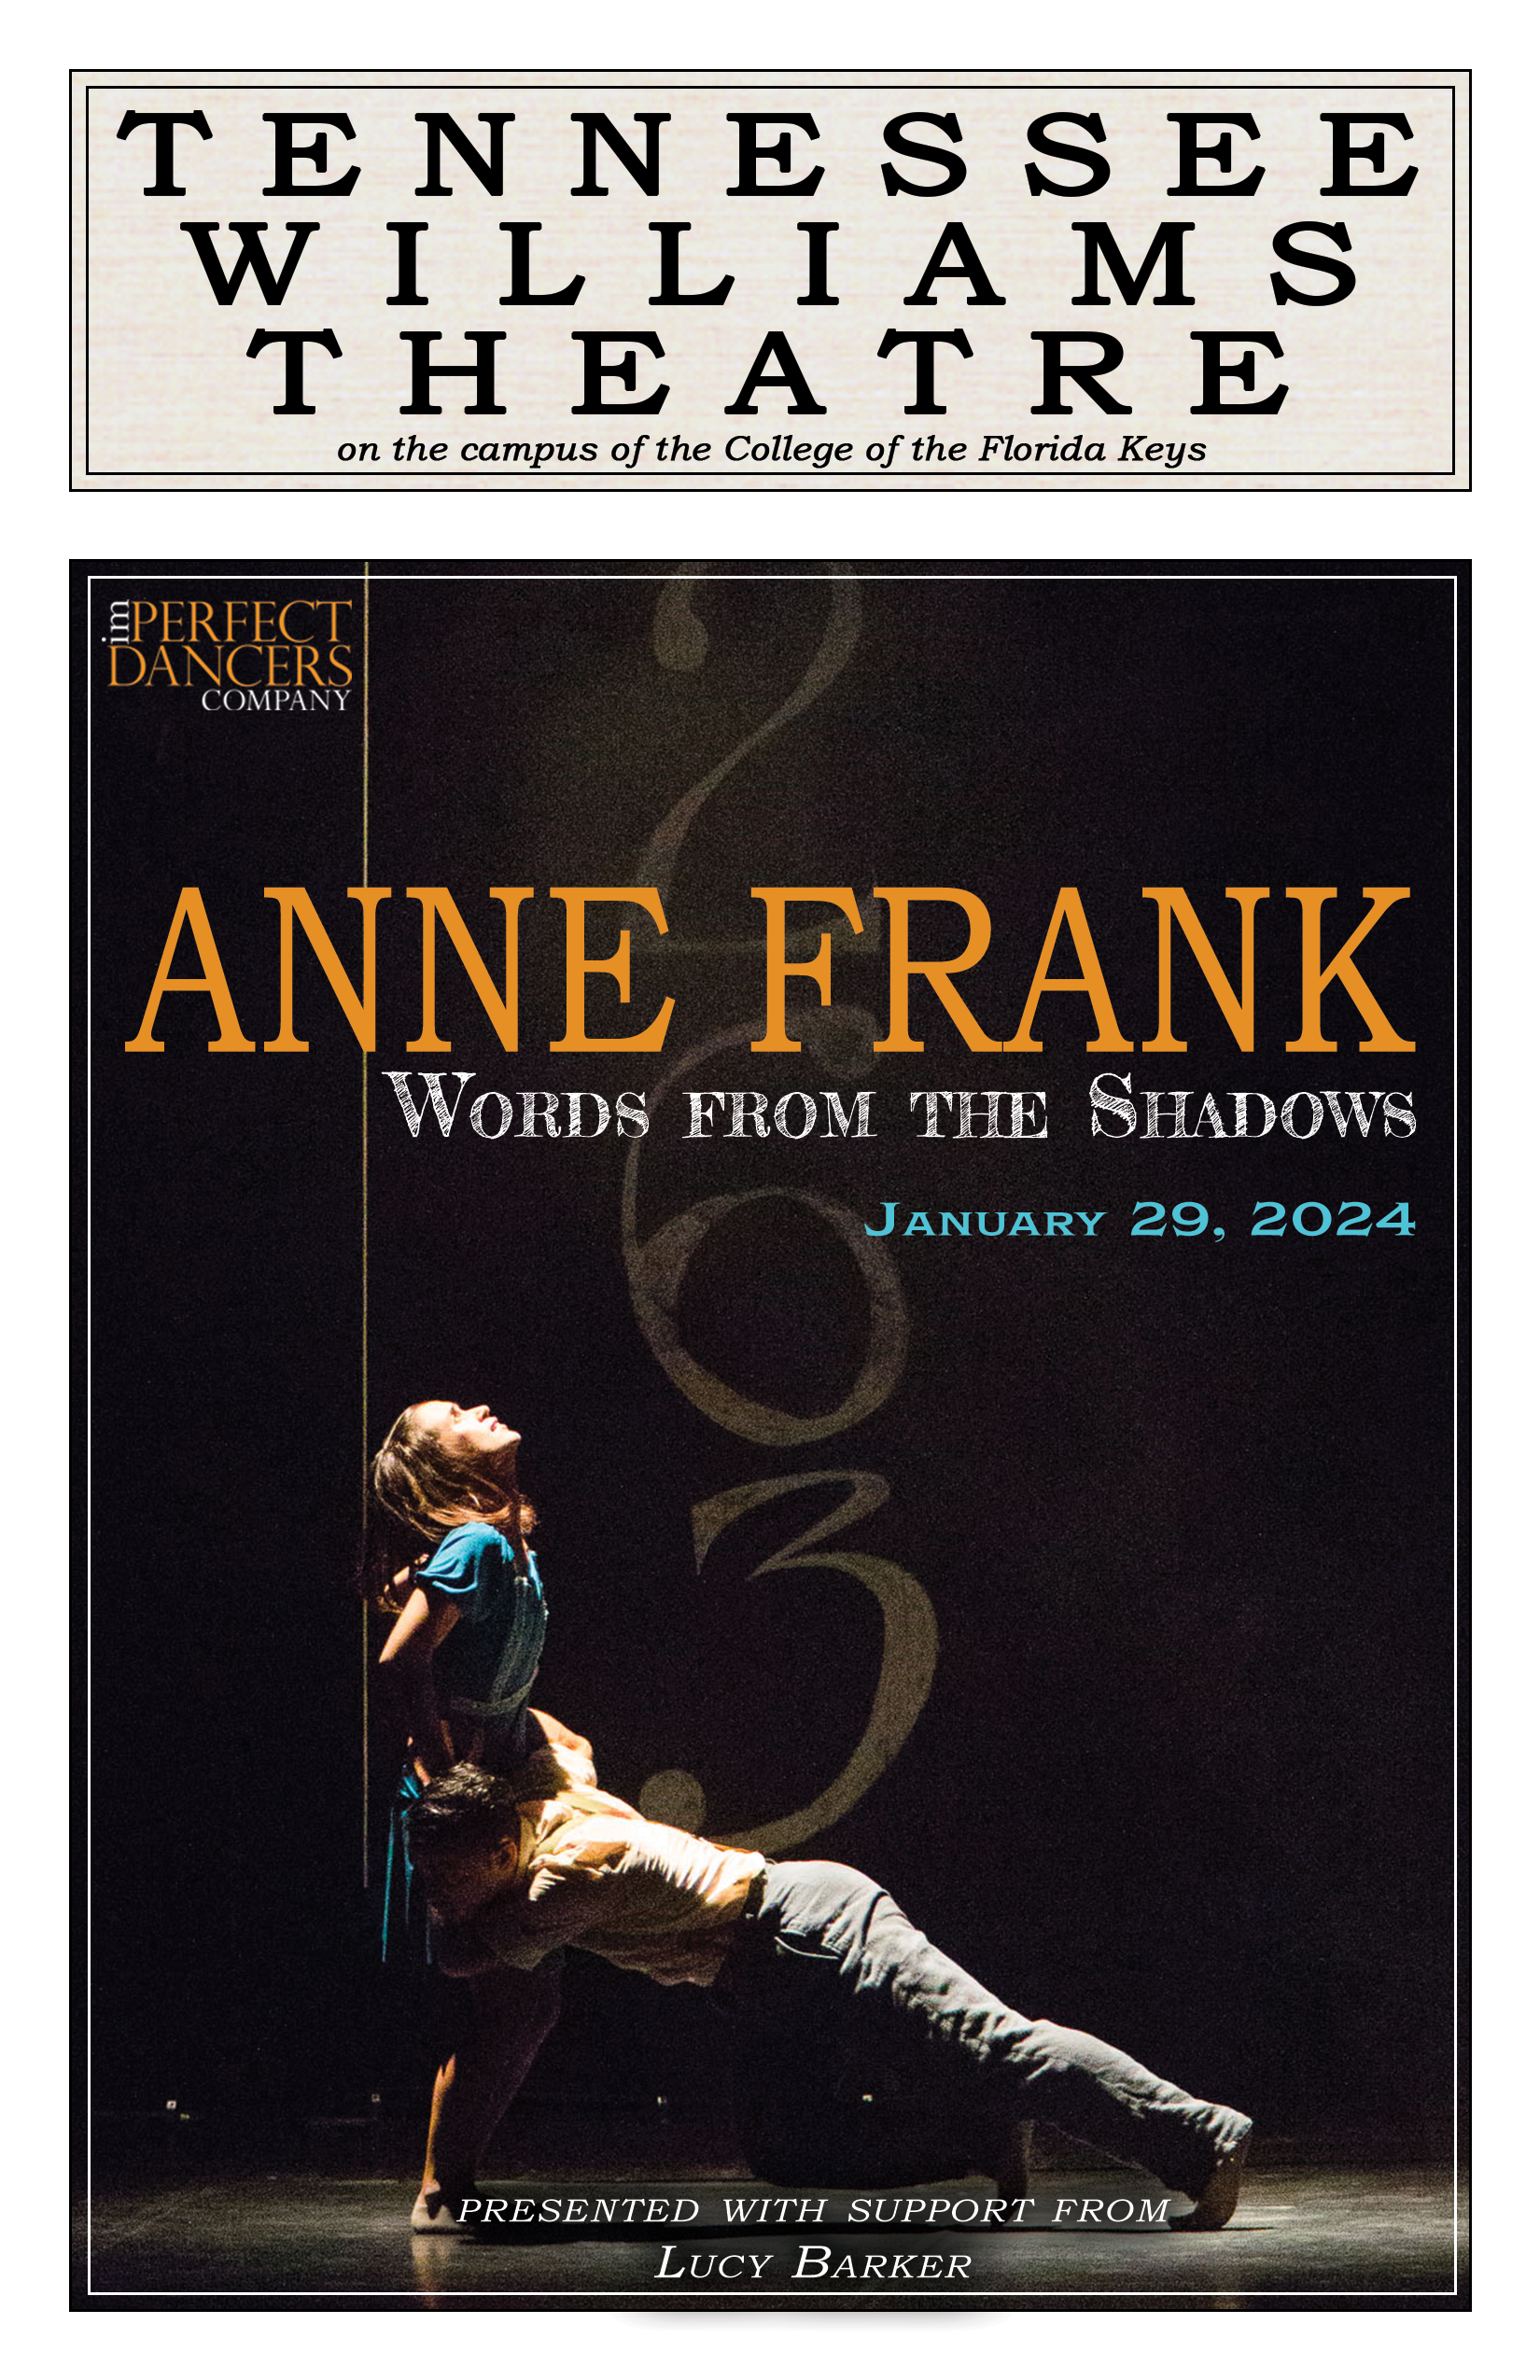 AnneFrankCover3.png